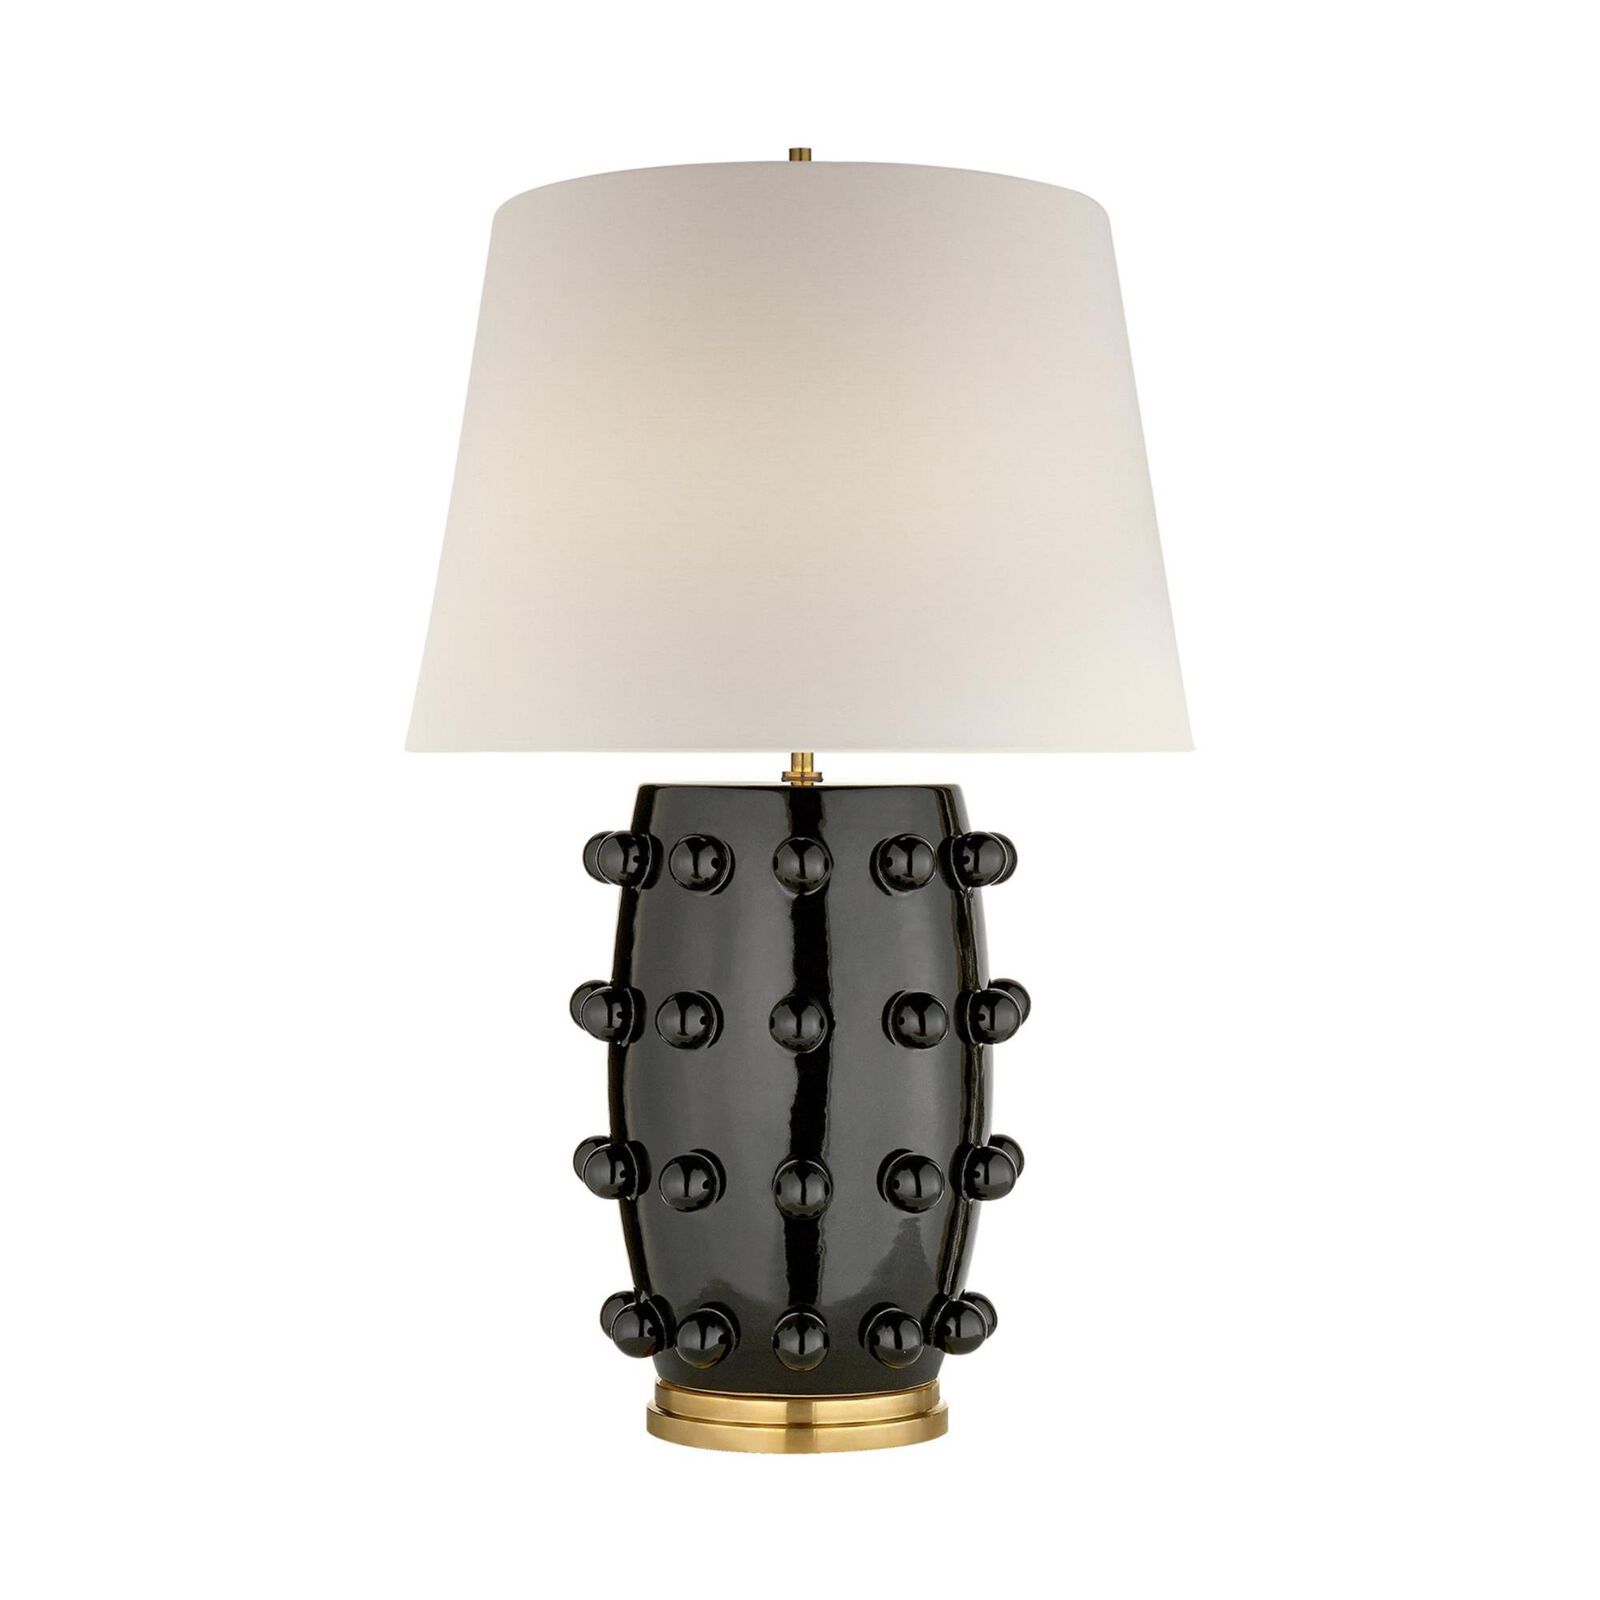 New




Kelly Wearstler Linden 26 Inch Table Lamp by Visual Comfort and Co.

Capitol ID: 2272165
... | 1800 Lighting